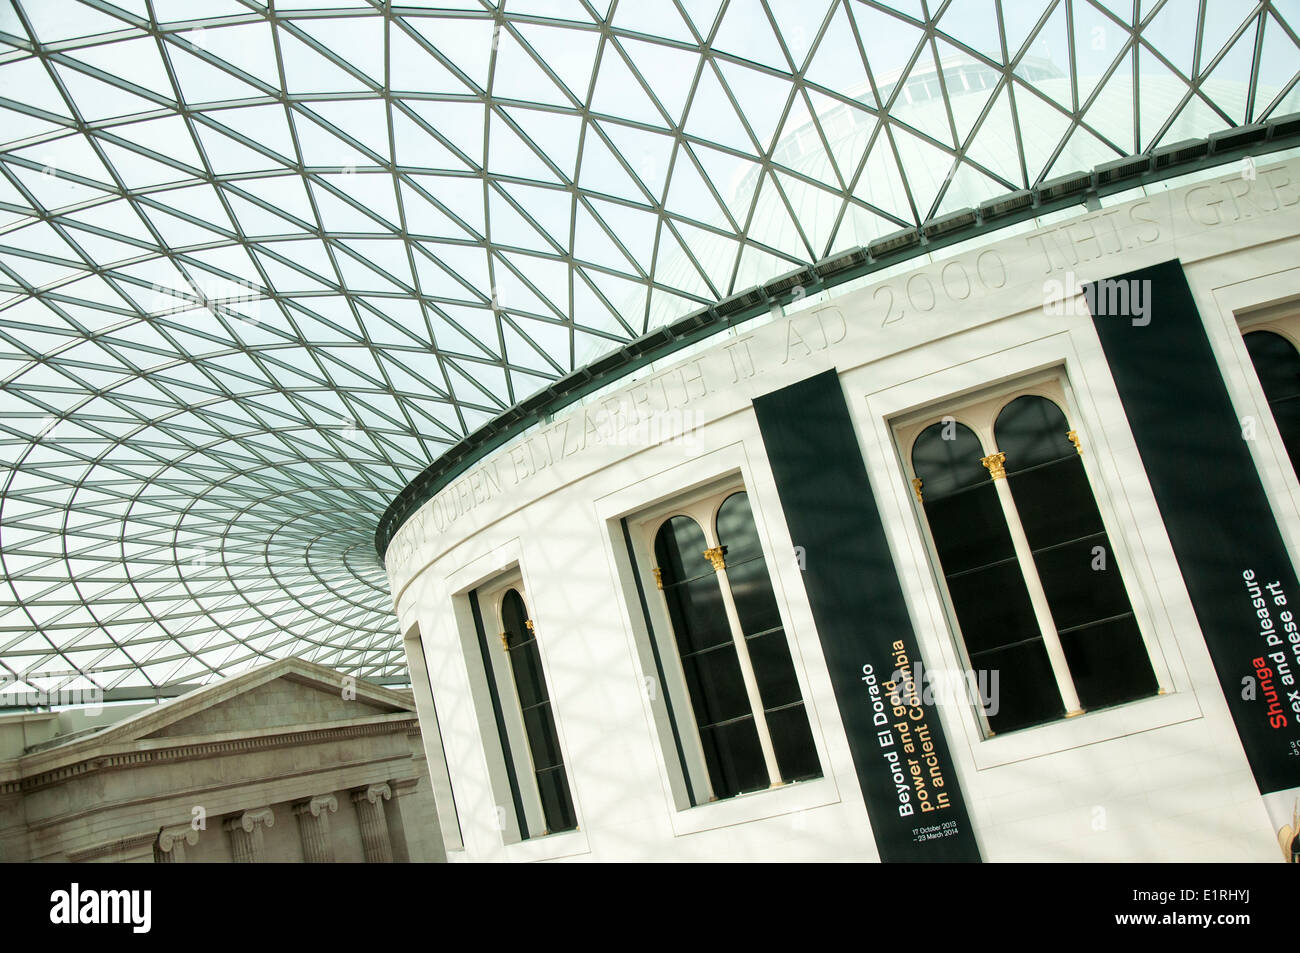 The modern glass roof of the Great Hall in the British Museum, London ...